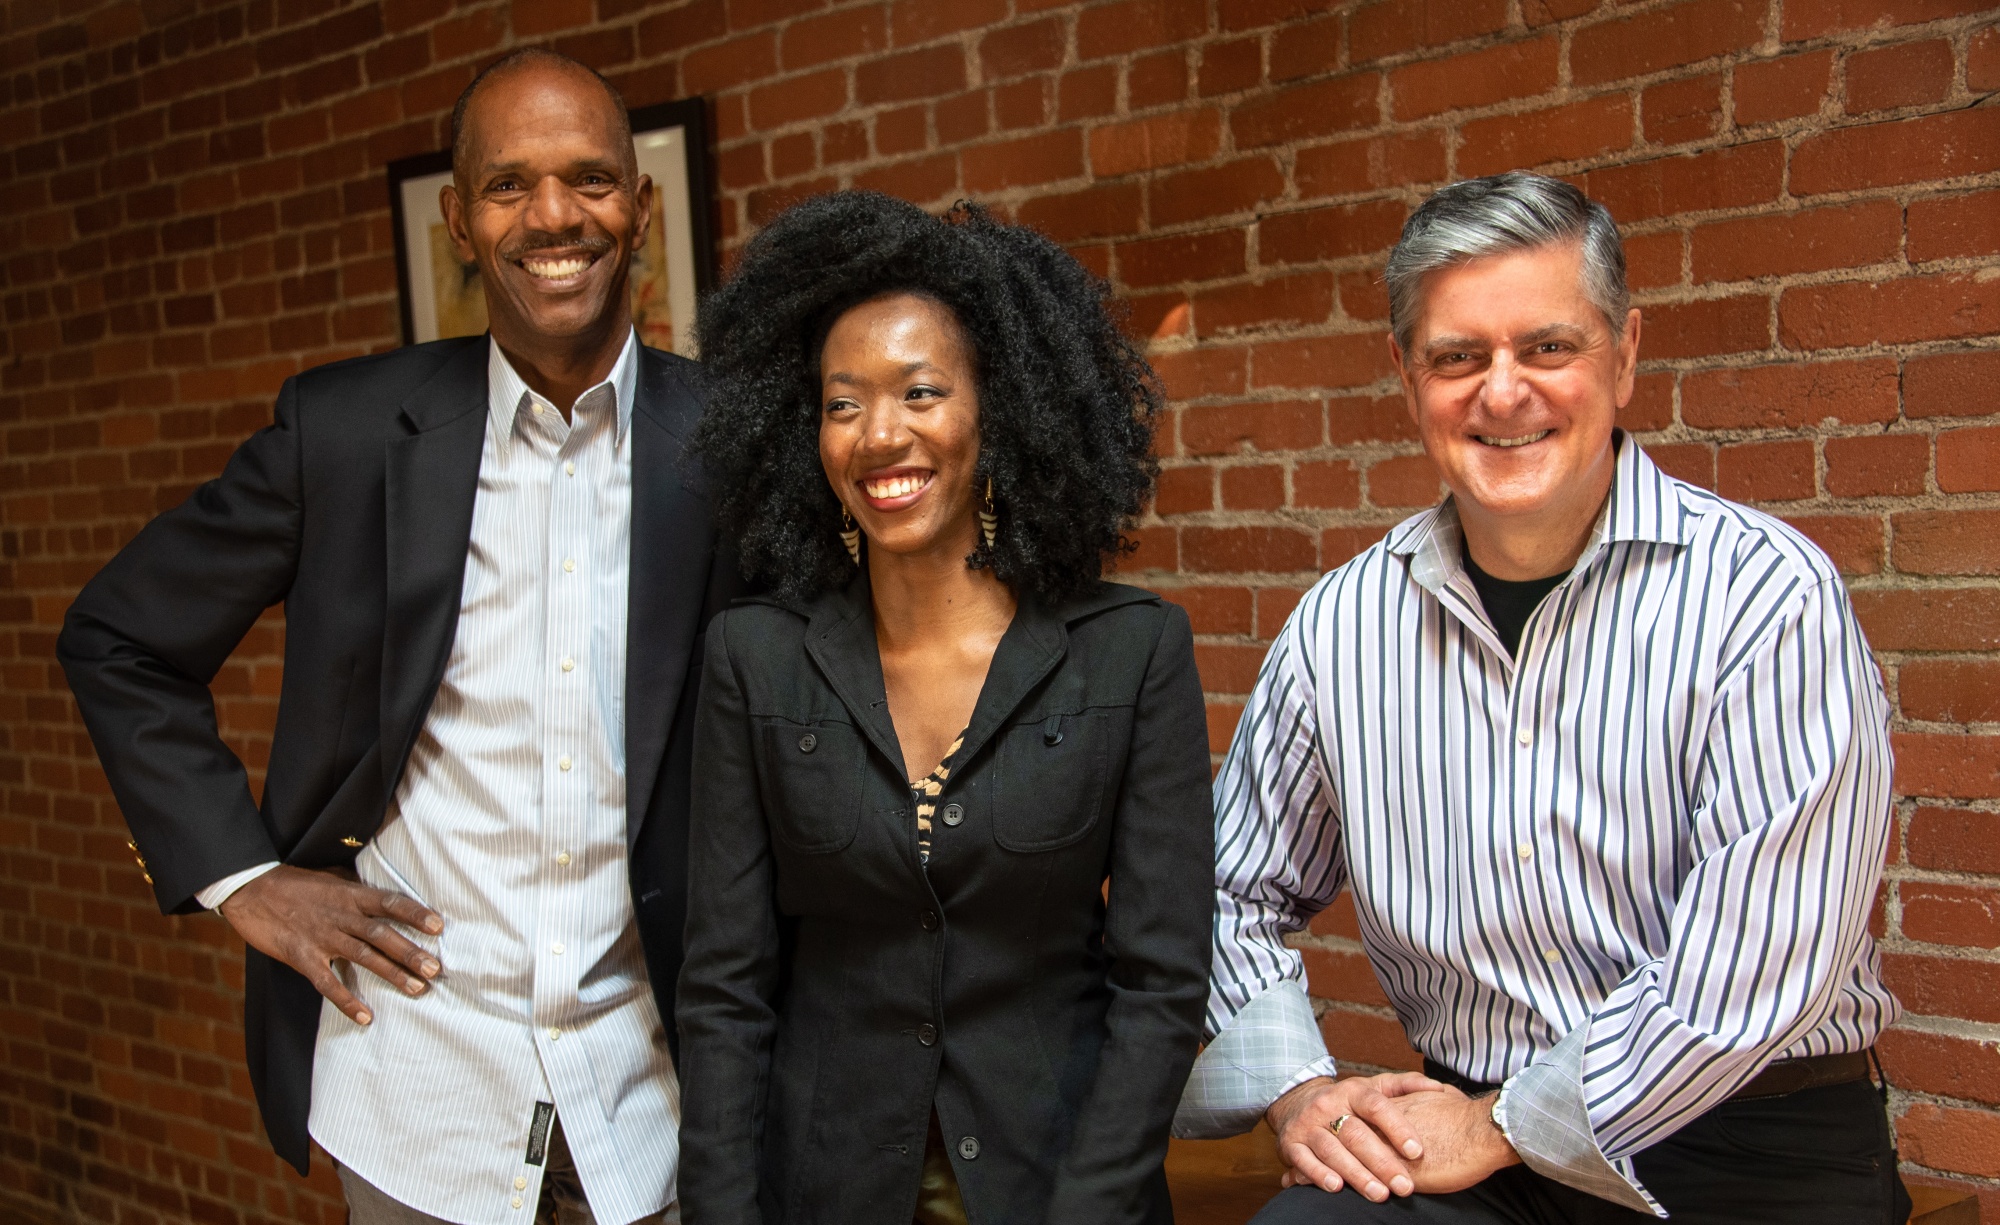 David Motley,&nbsp;Kelauni Jasmyn and Sean Sebastian are general partners in the newly formed Black Tech Nation Ventures, which aims to both fund Black entrepreneurs&nbsp;and&nbsp;recruit other Black venture capitalists.&nbsp;